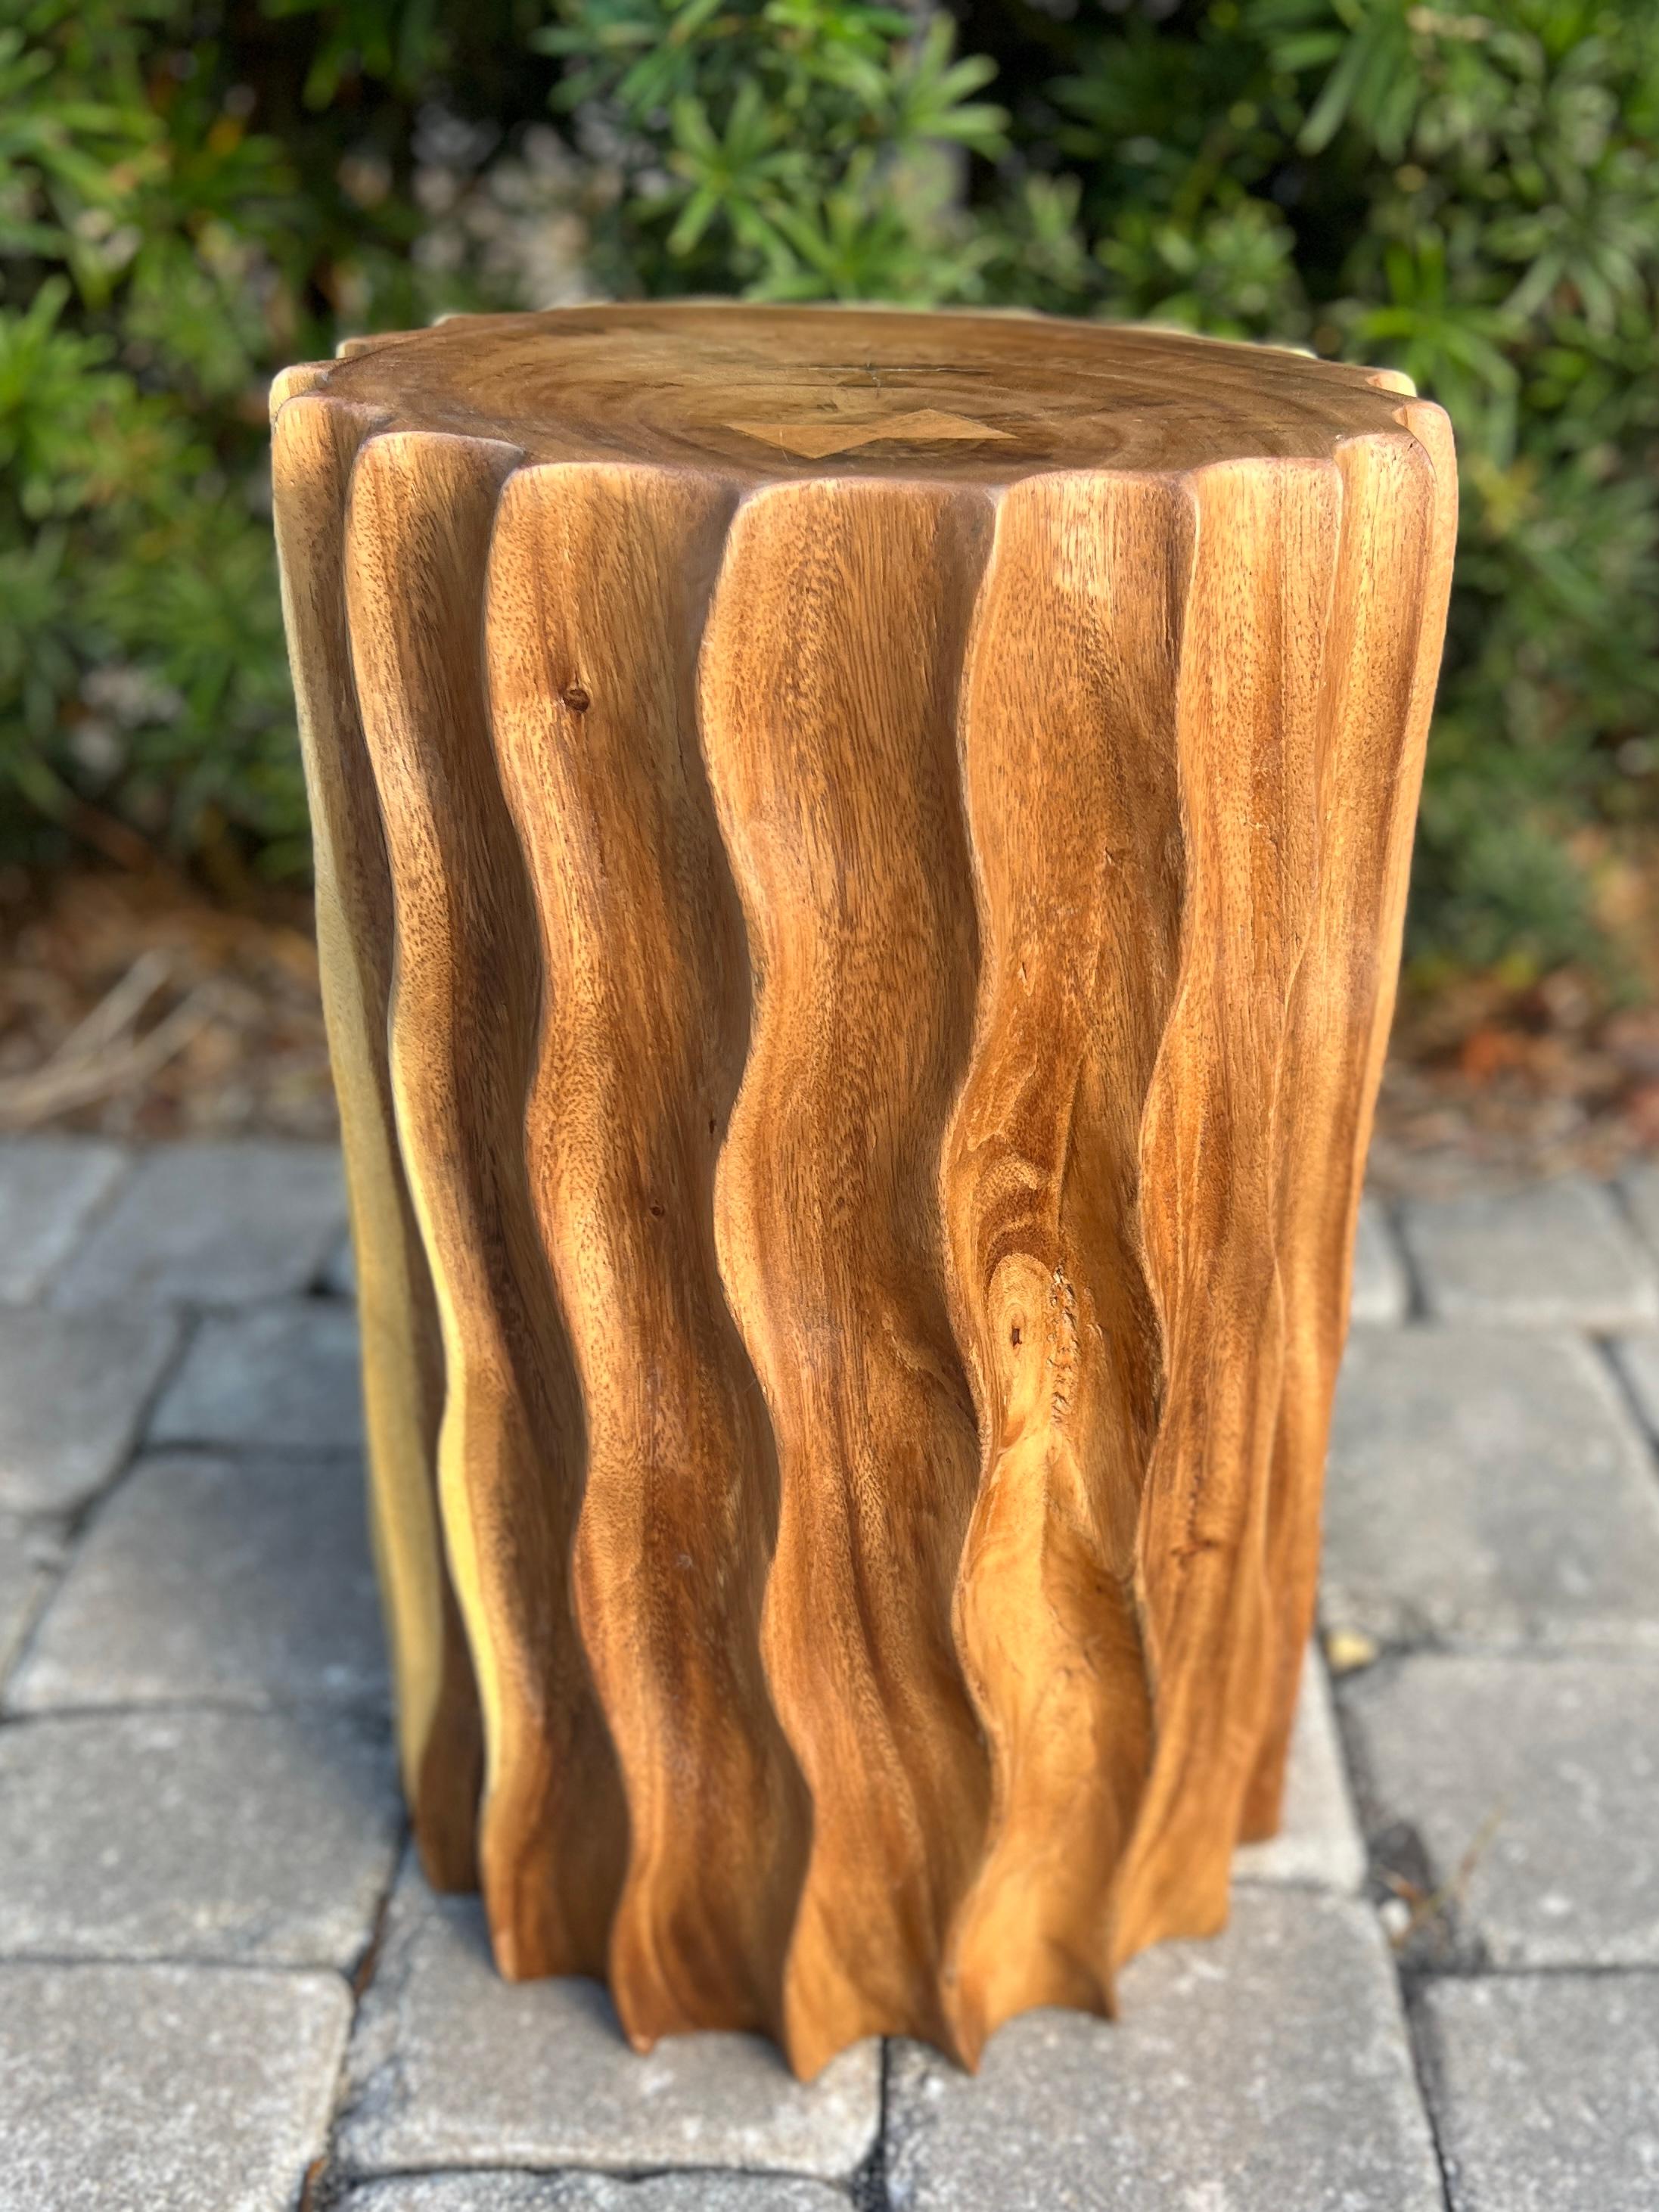 Sculptural drum side table comprised of reclaimed suar wood featuring hand-carved fluted sides with wave formation.  This versatile piece can also be used as a stool or a pedestal. Each table is uniquely handcrafted and features variegated hues of